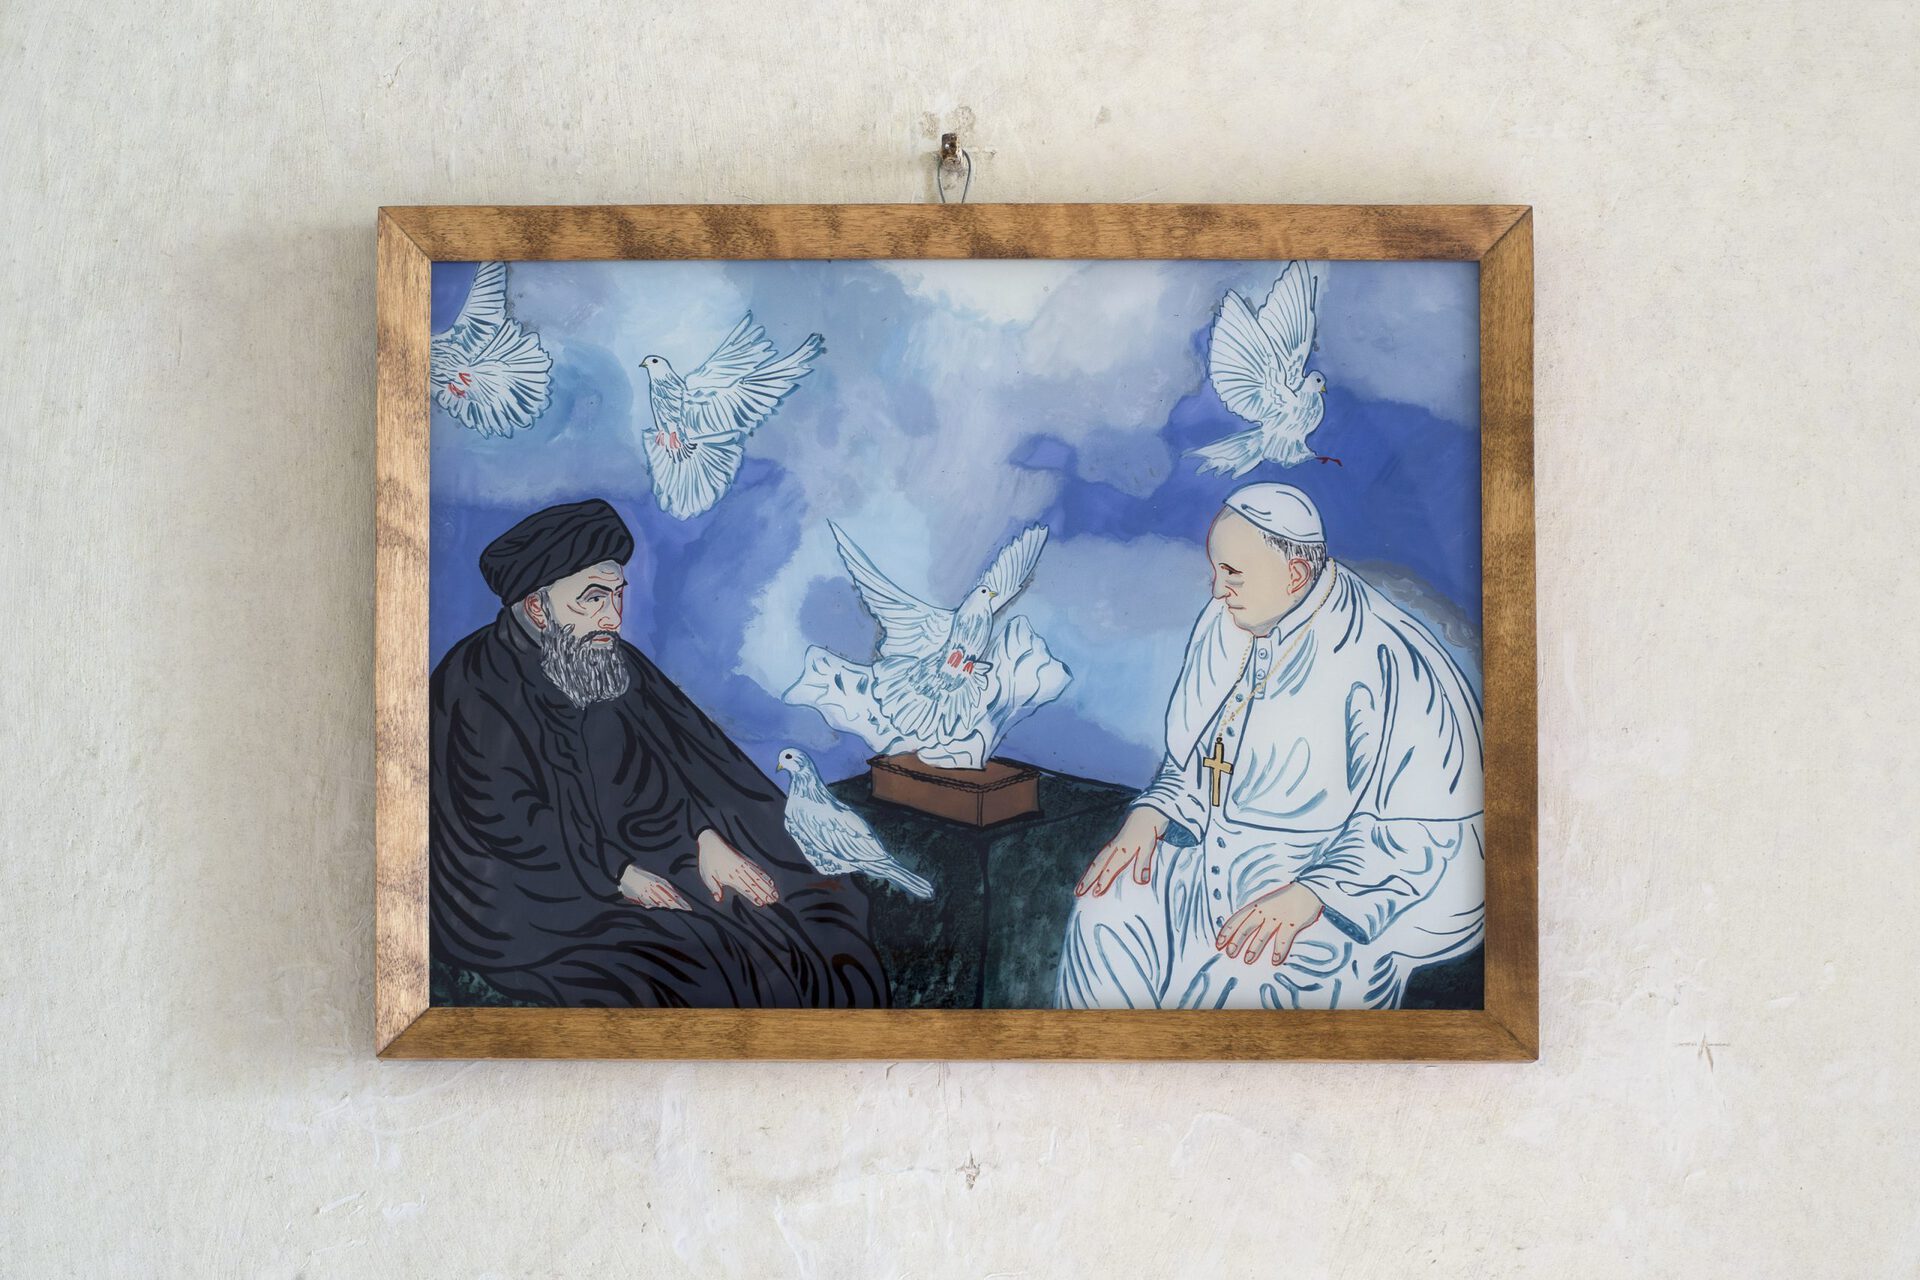 Slavs and Tatars, Communion (Visit Iraquiam), 2021 reverse painting on glass with acrylic and synthetic paint 32 × 44 cm courtesy of the artists and Raster Gallery, Warsaw